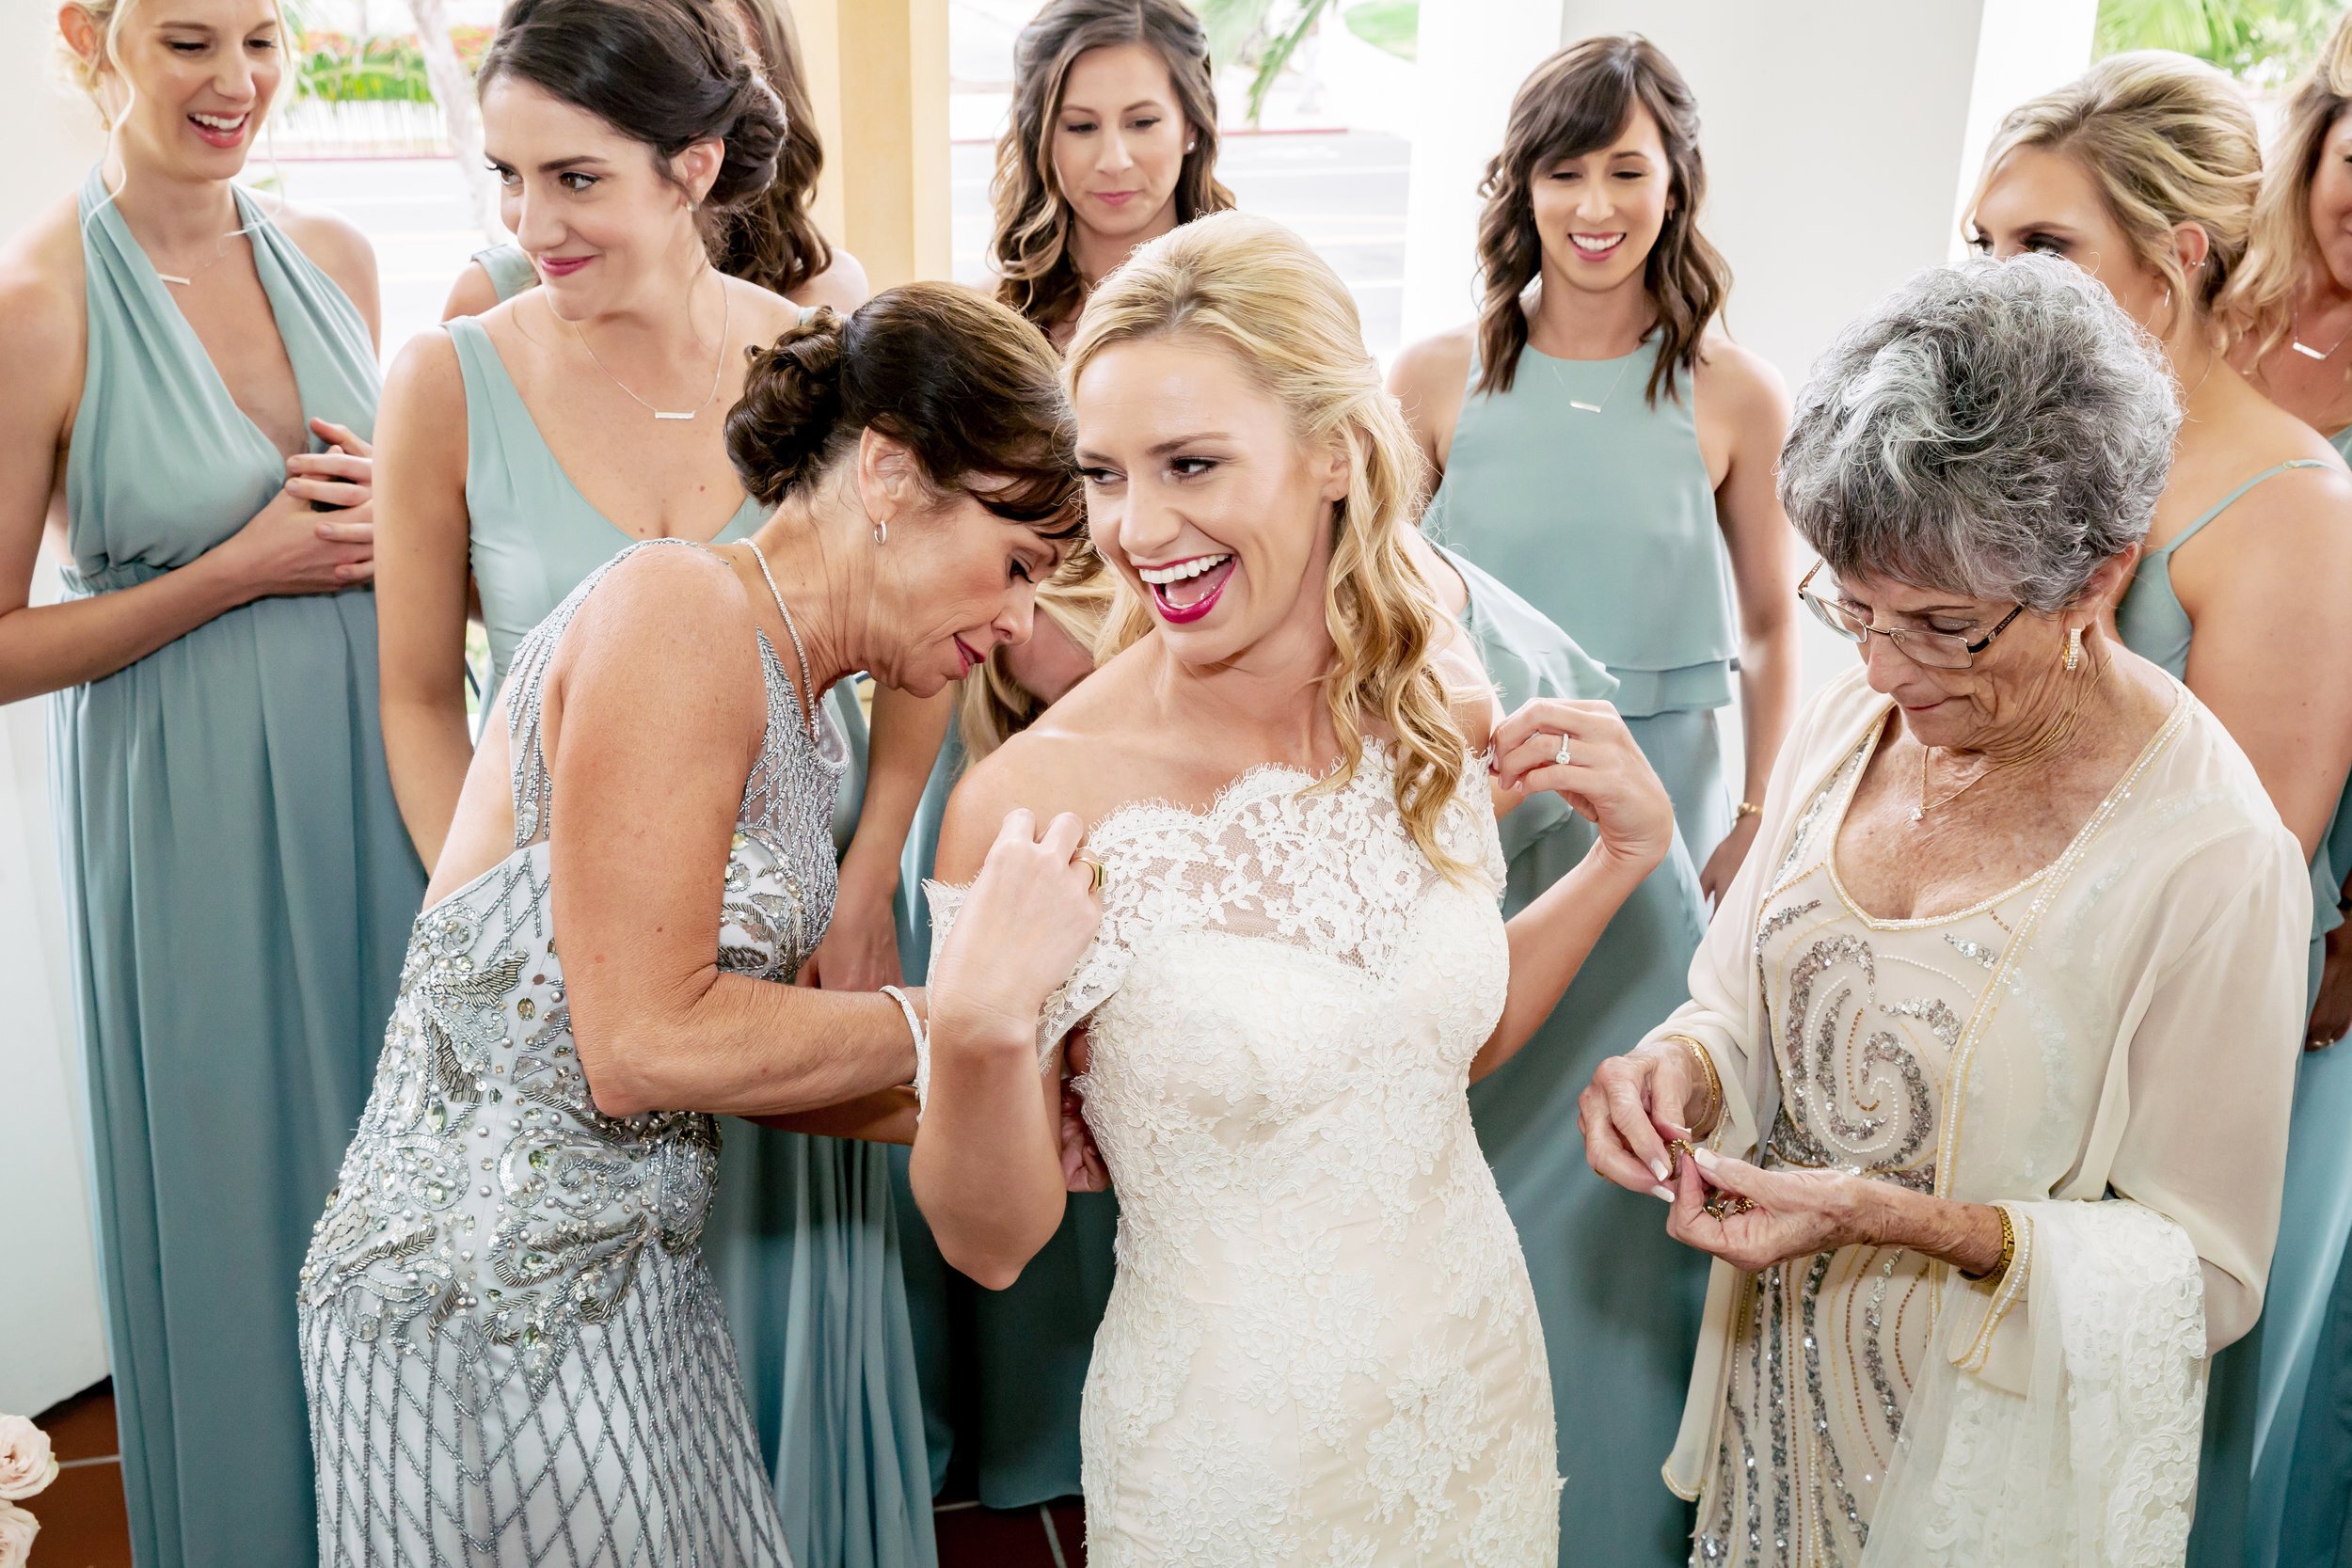 www.santabarbarawedding.com | Rewind Photography | Santa Barbara Historical Museum | Evens by M and M | La Rouge Artistry | Bride Getting Ready with Bridesmaids